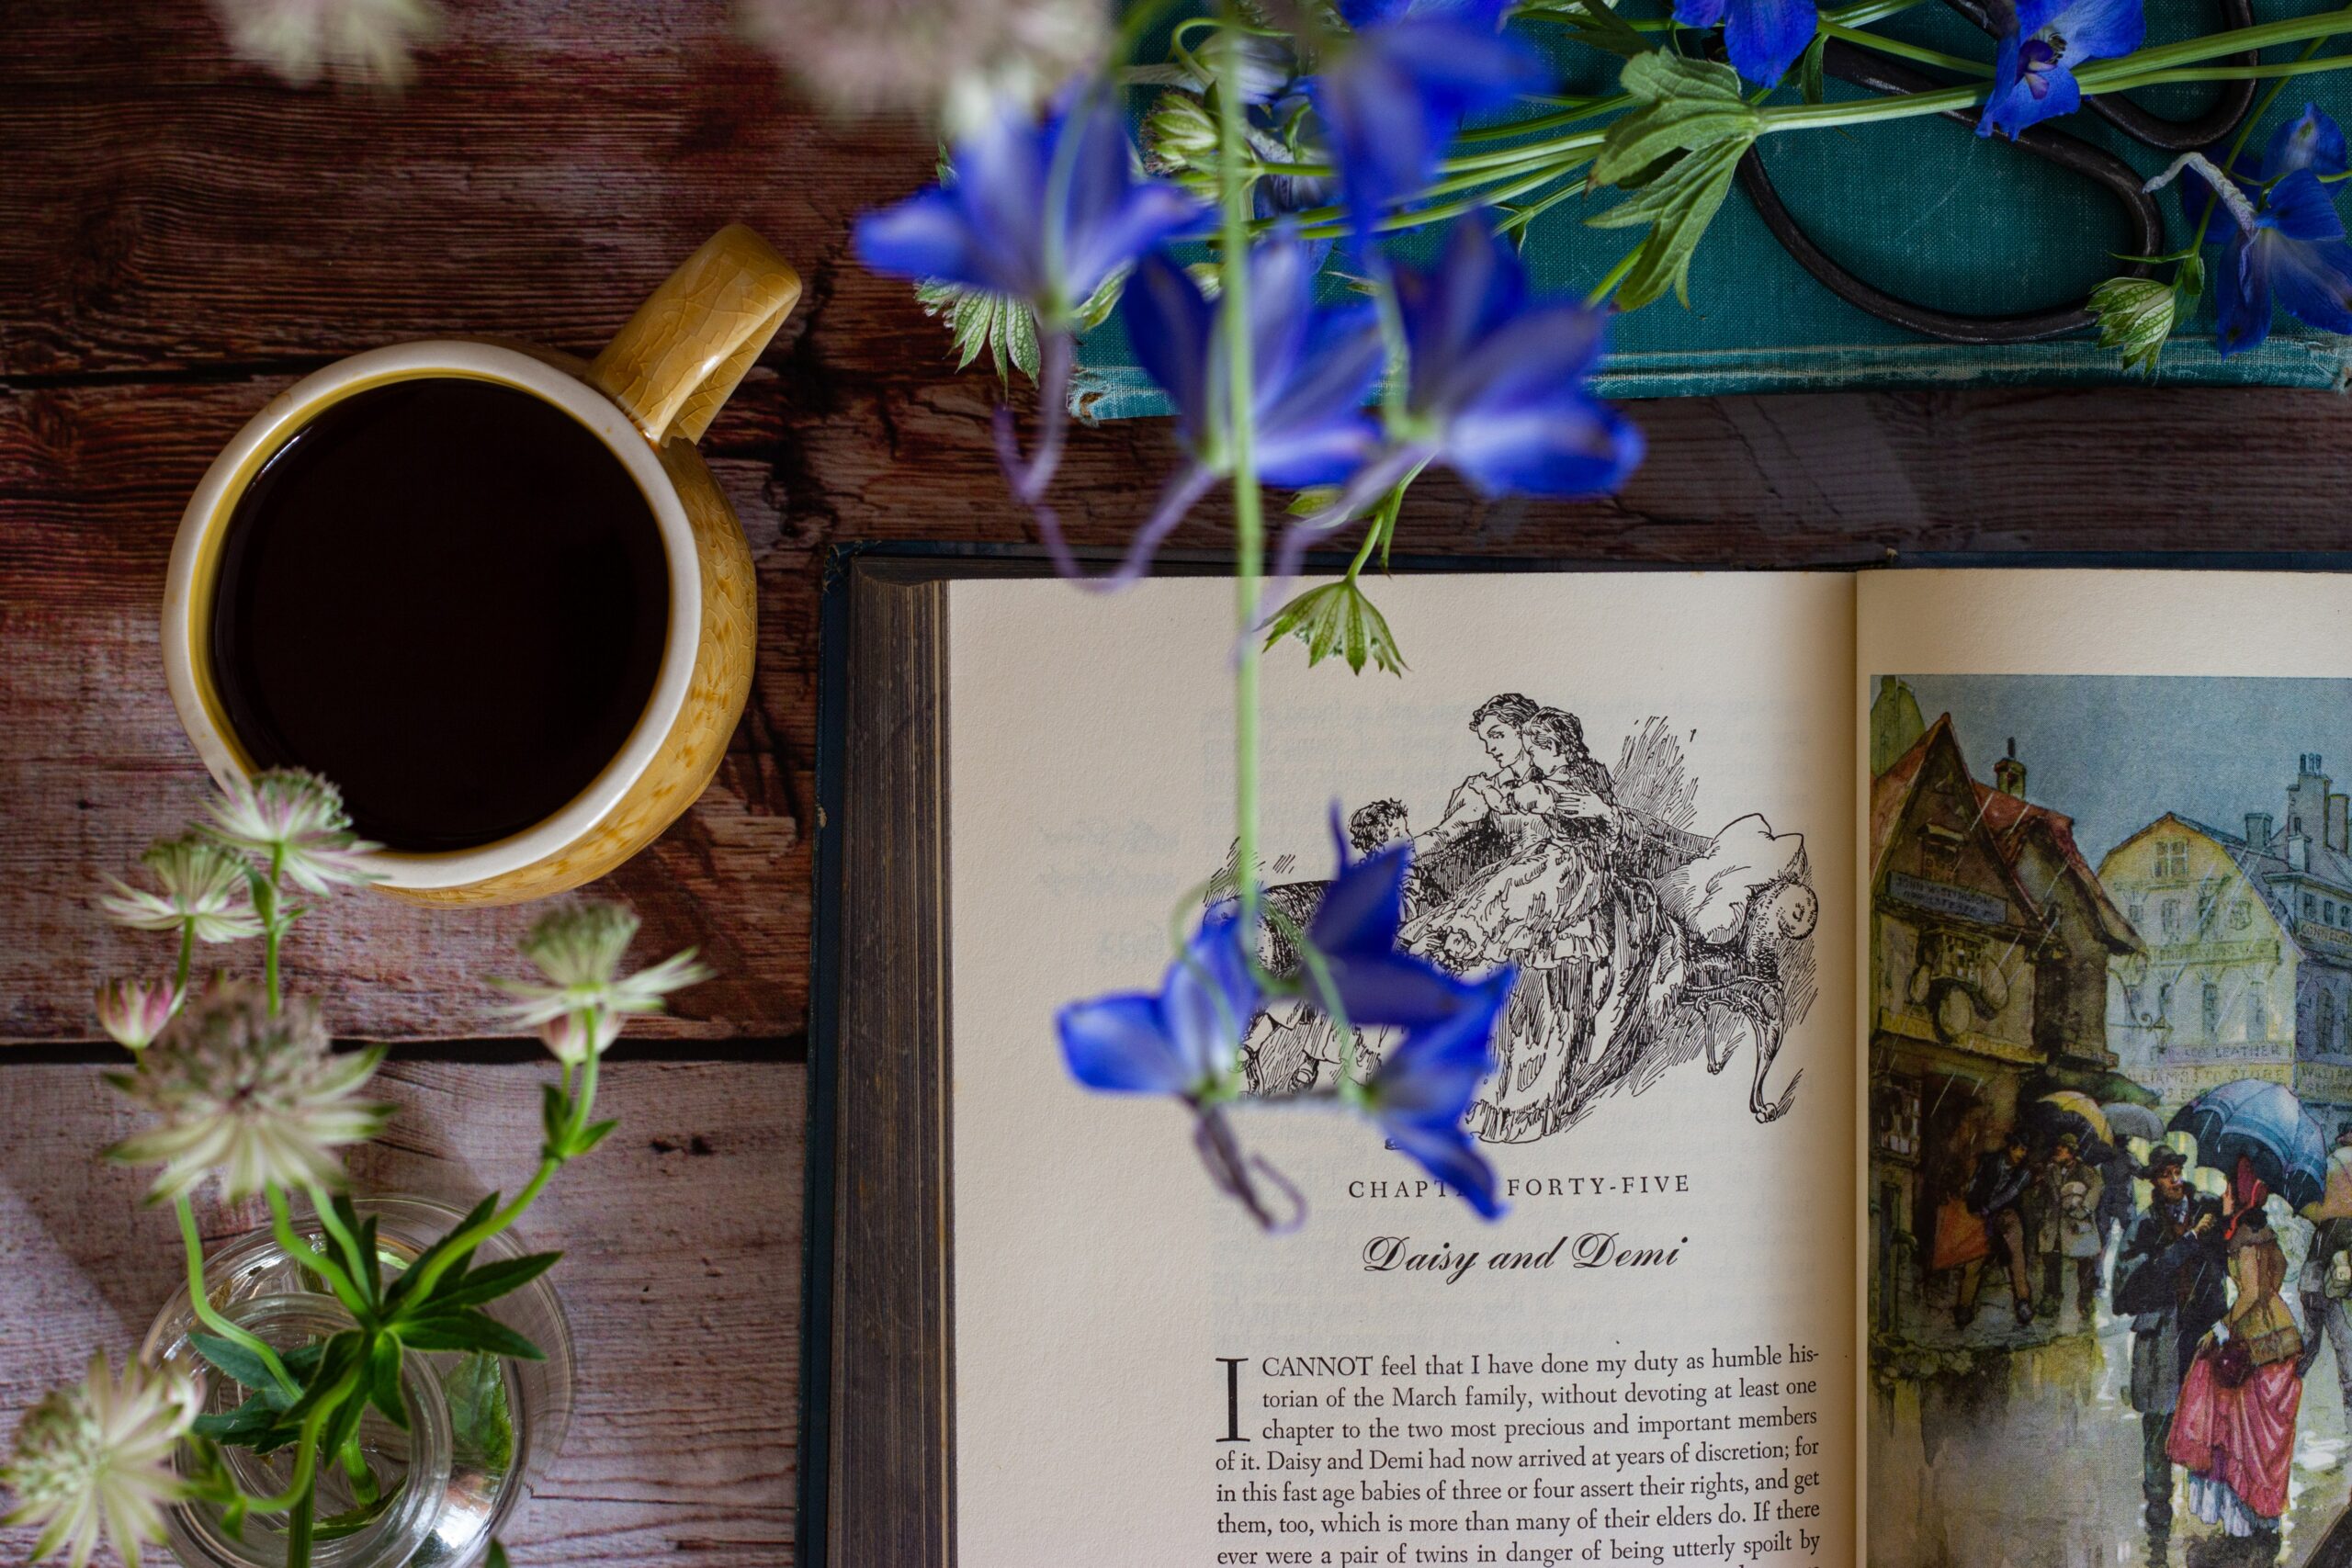 A book open on a page from Little Women by Louisa May Alcott (chapter 45, Daisy and Demi). Flowers and a mug of coffee are also visible.